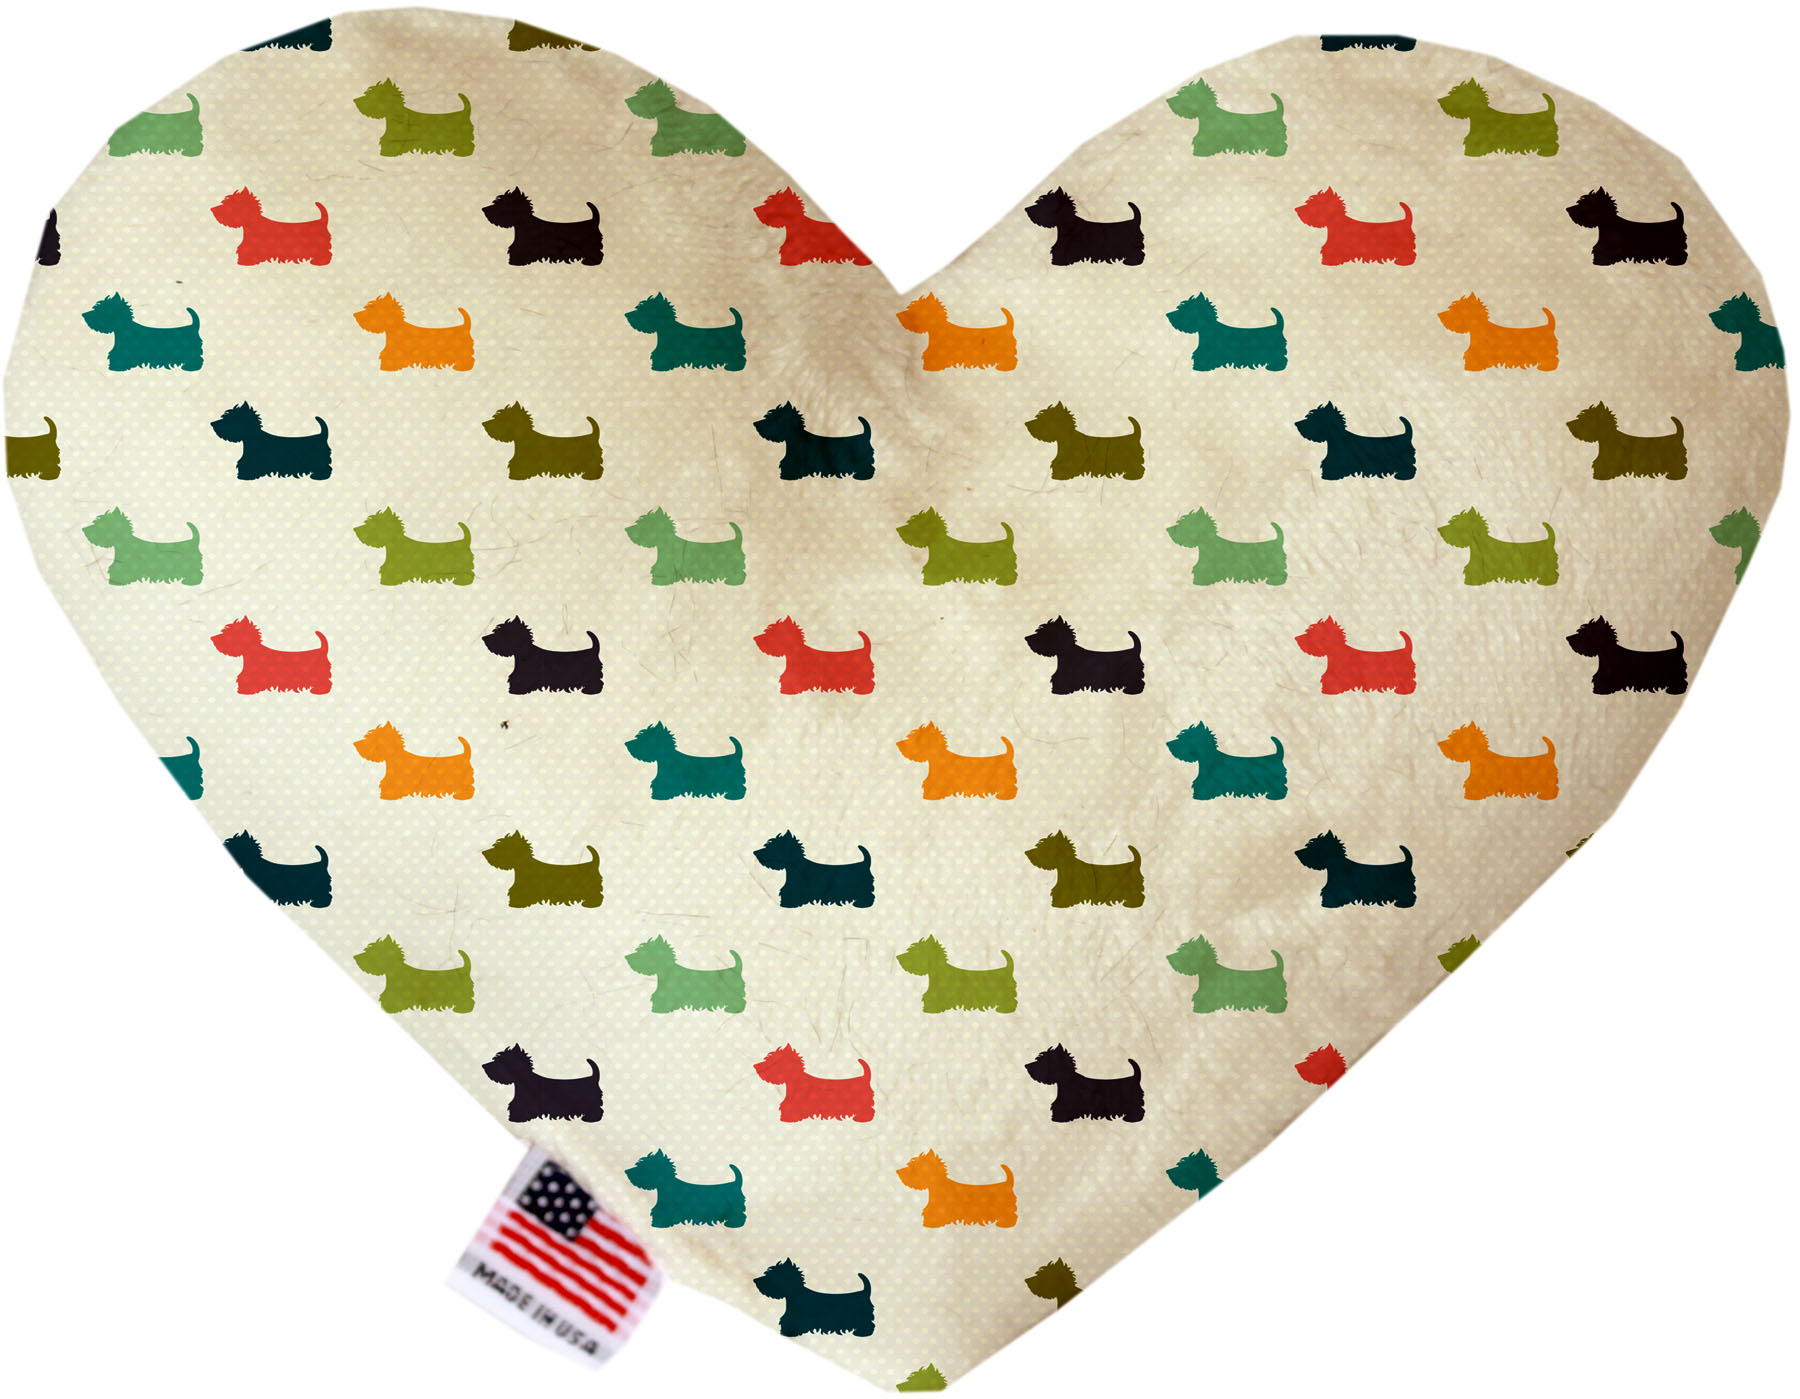 It is a Westie's World 8 inch Canvas Heart Dog Toy